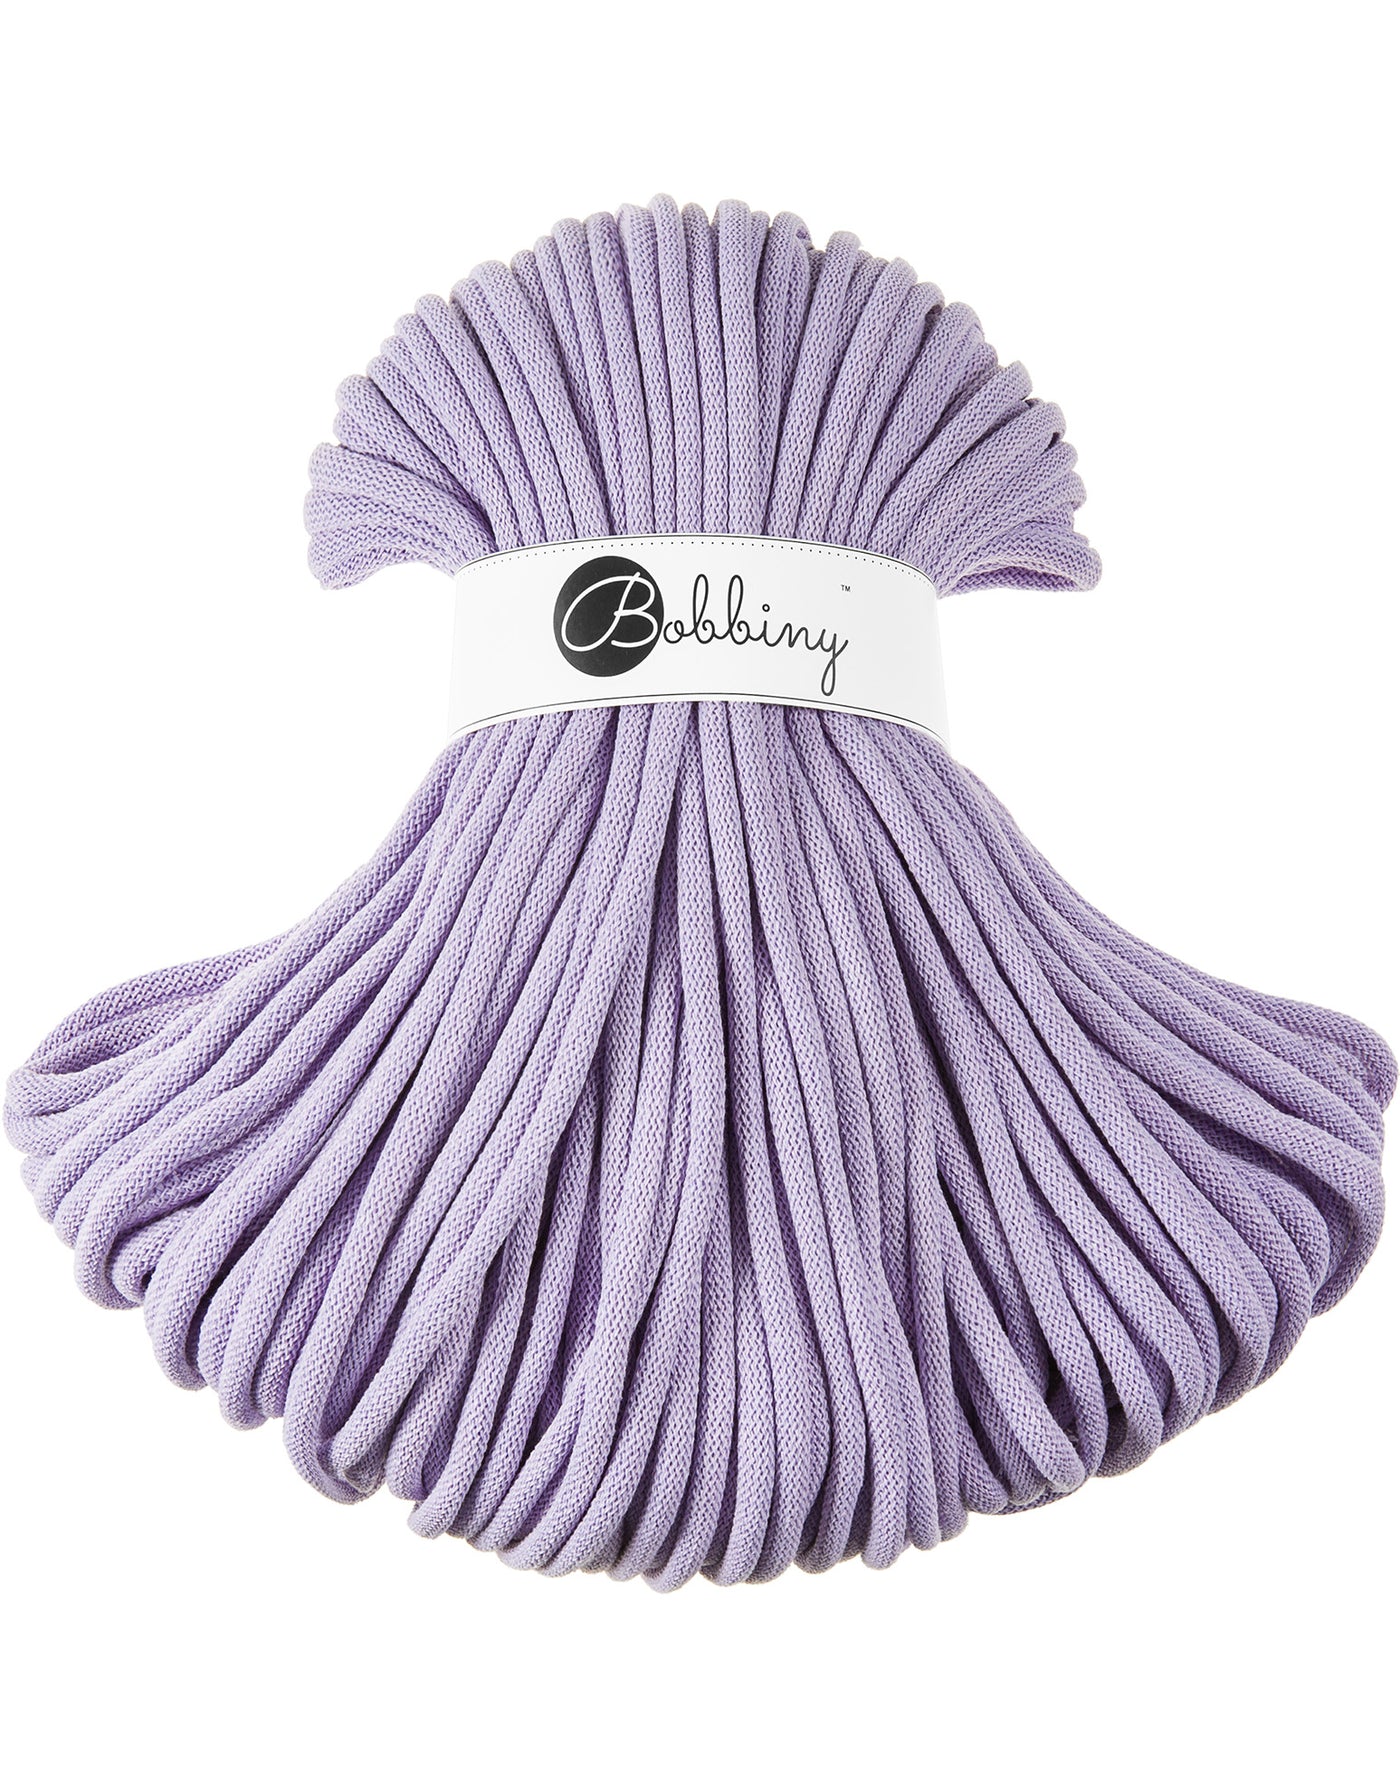 lavender shade braided cord in 9mm width